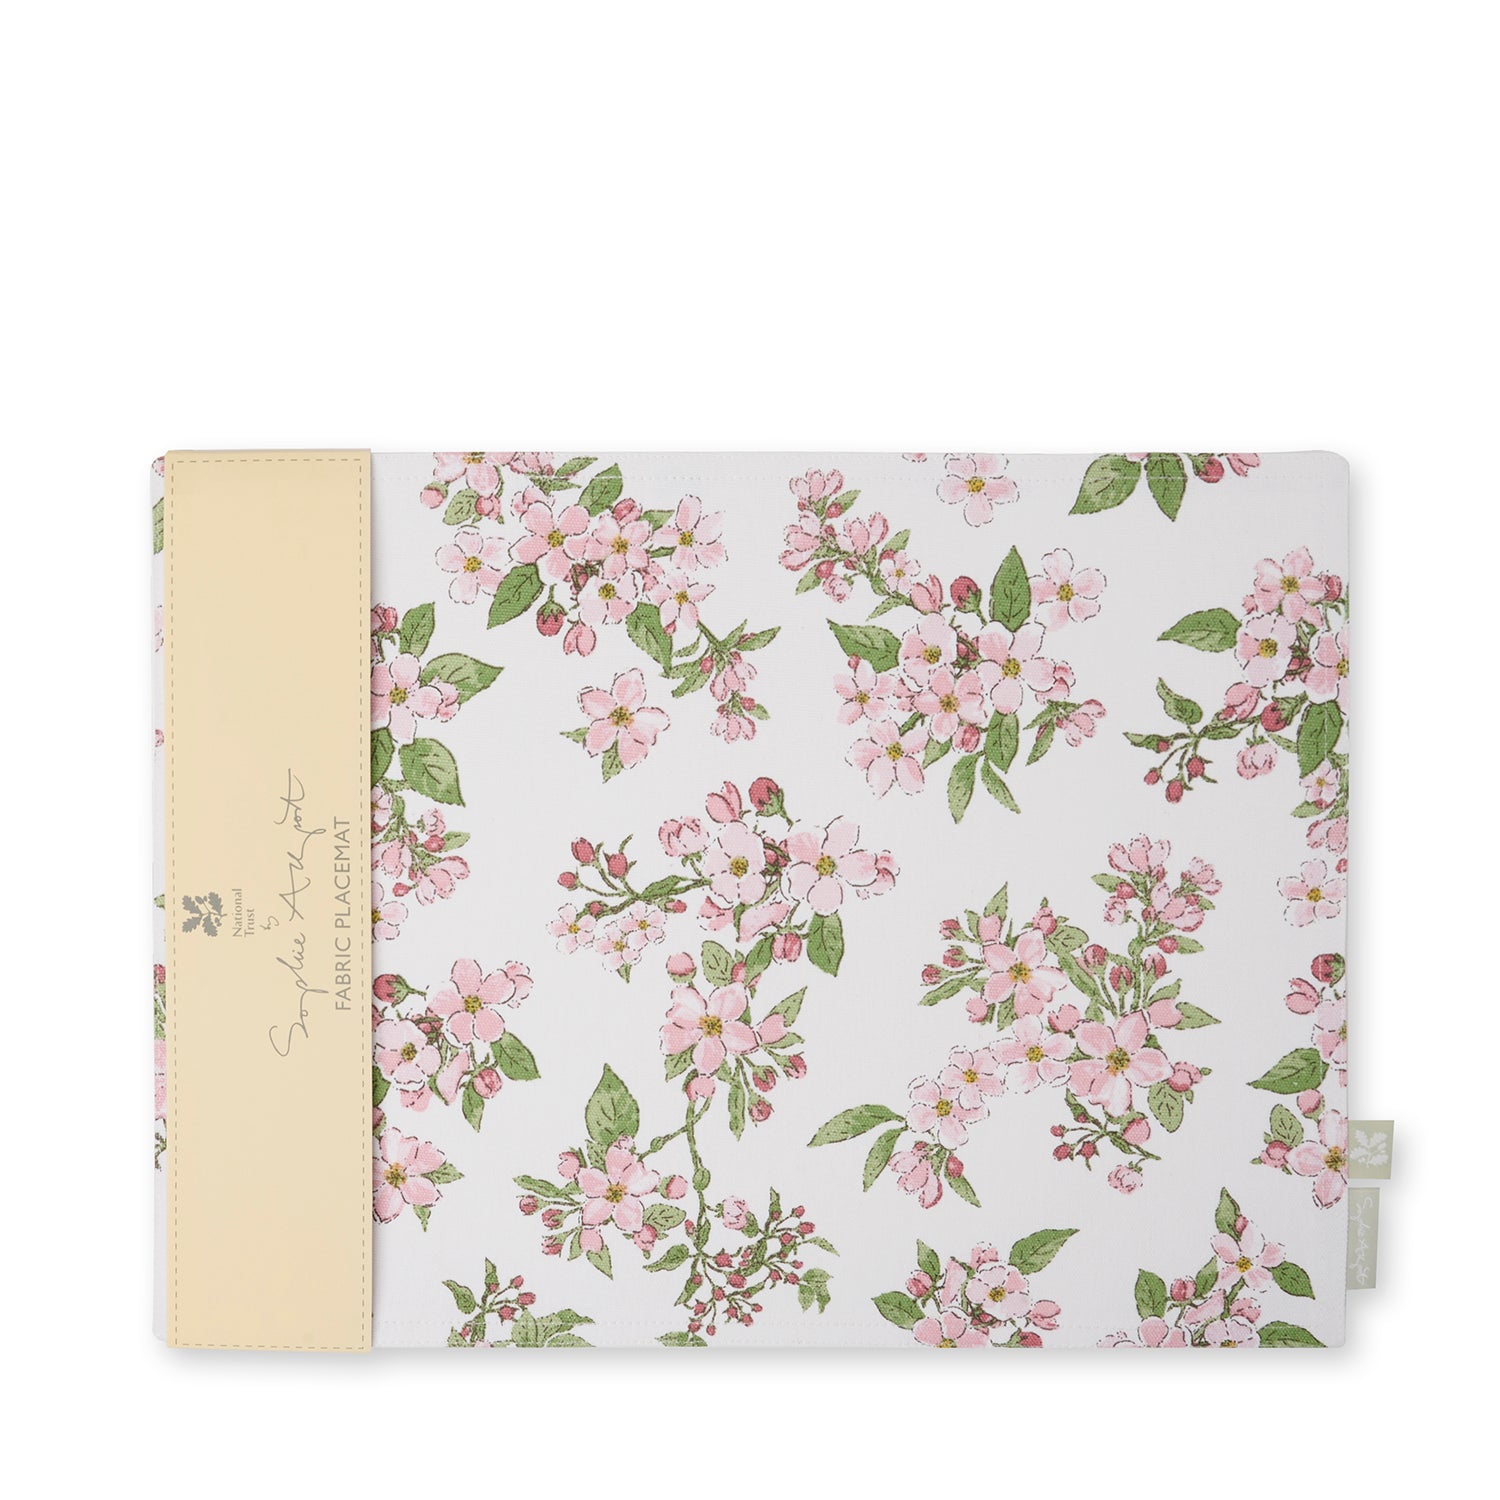 Blossom Fabric Placemats (Set of 2)